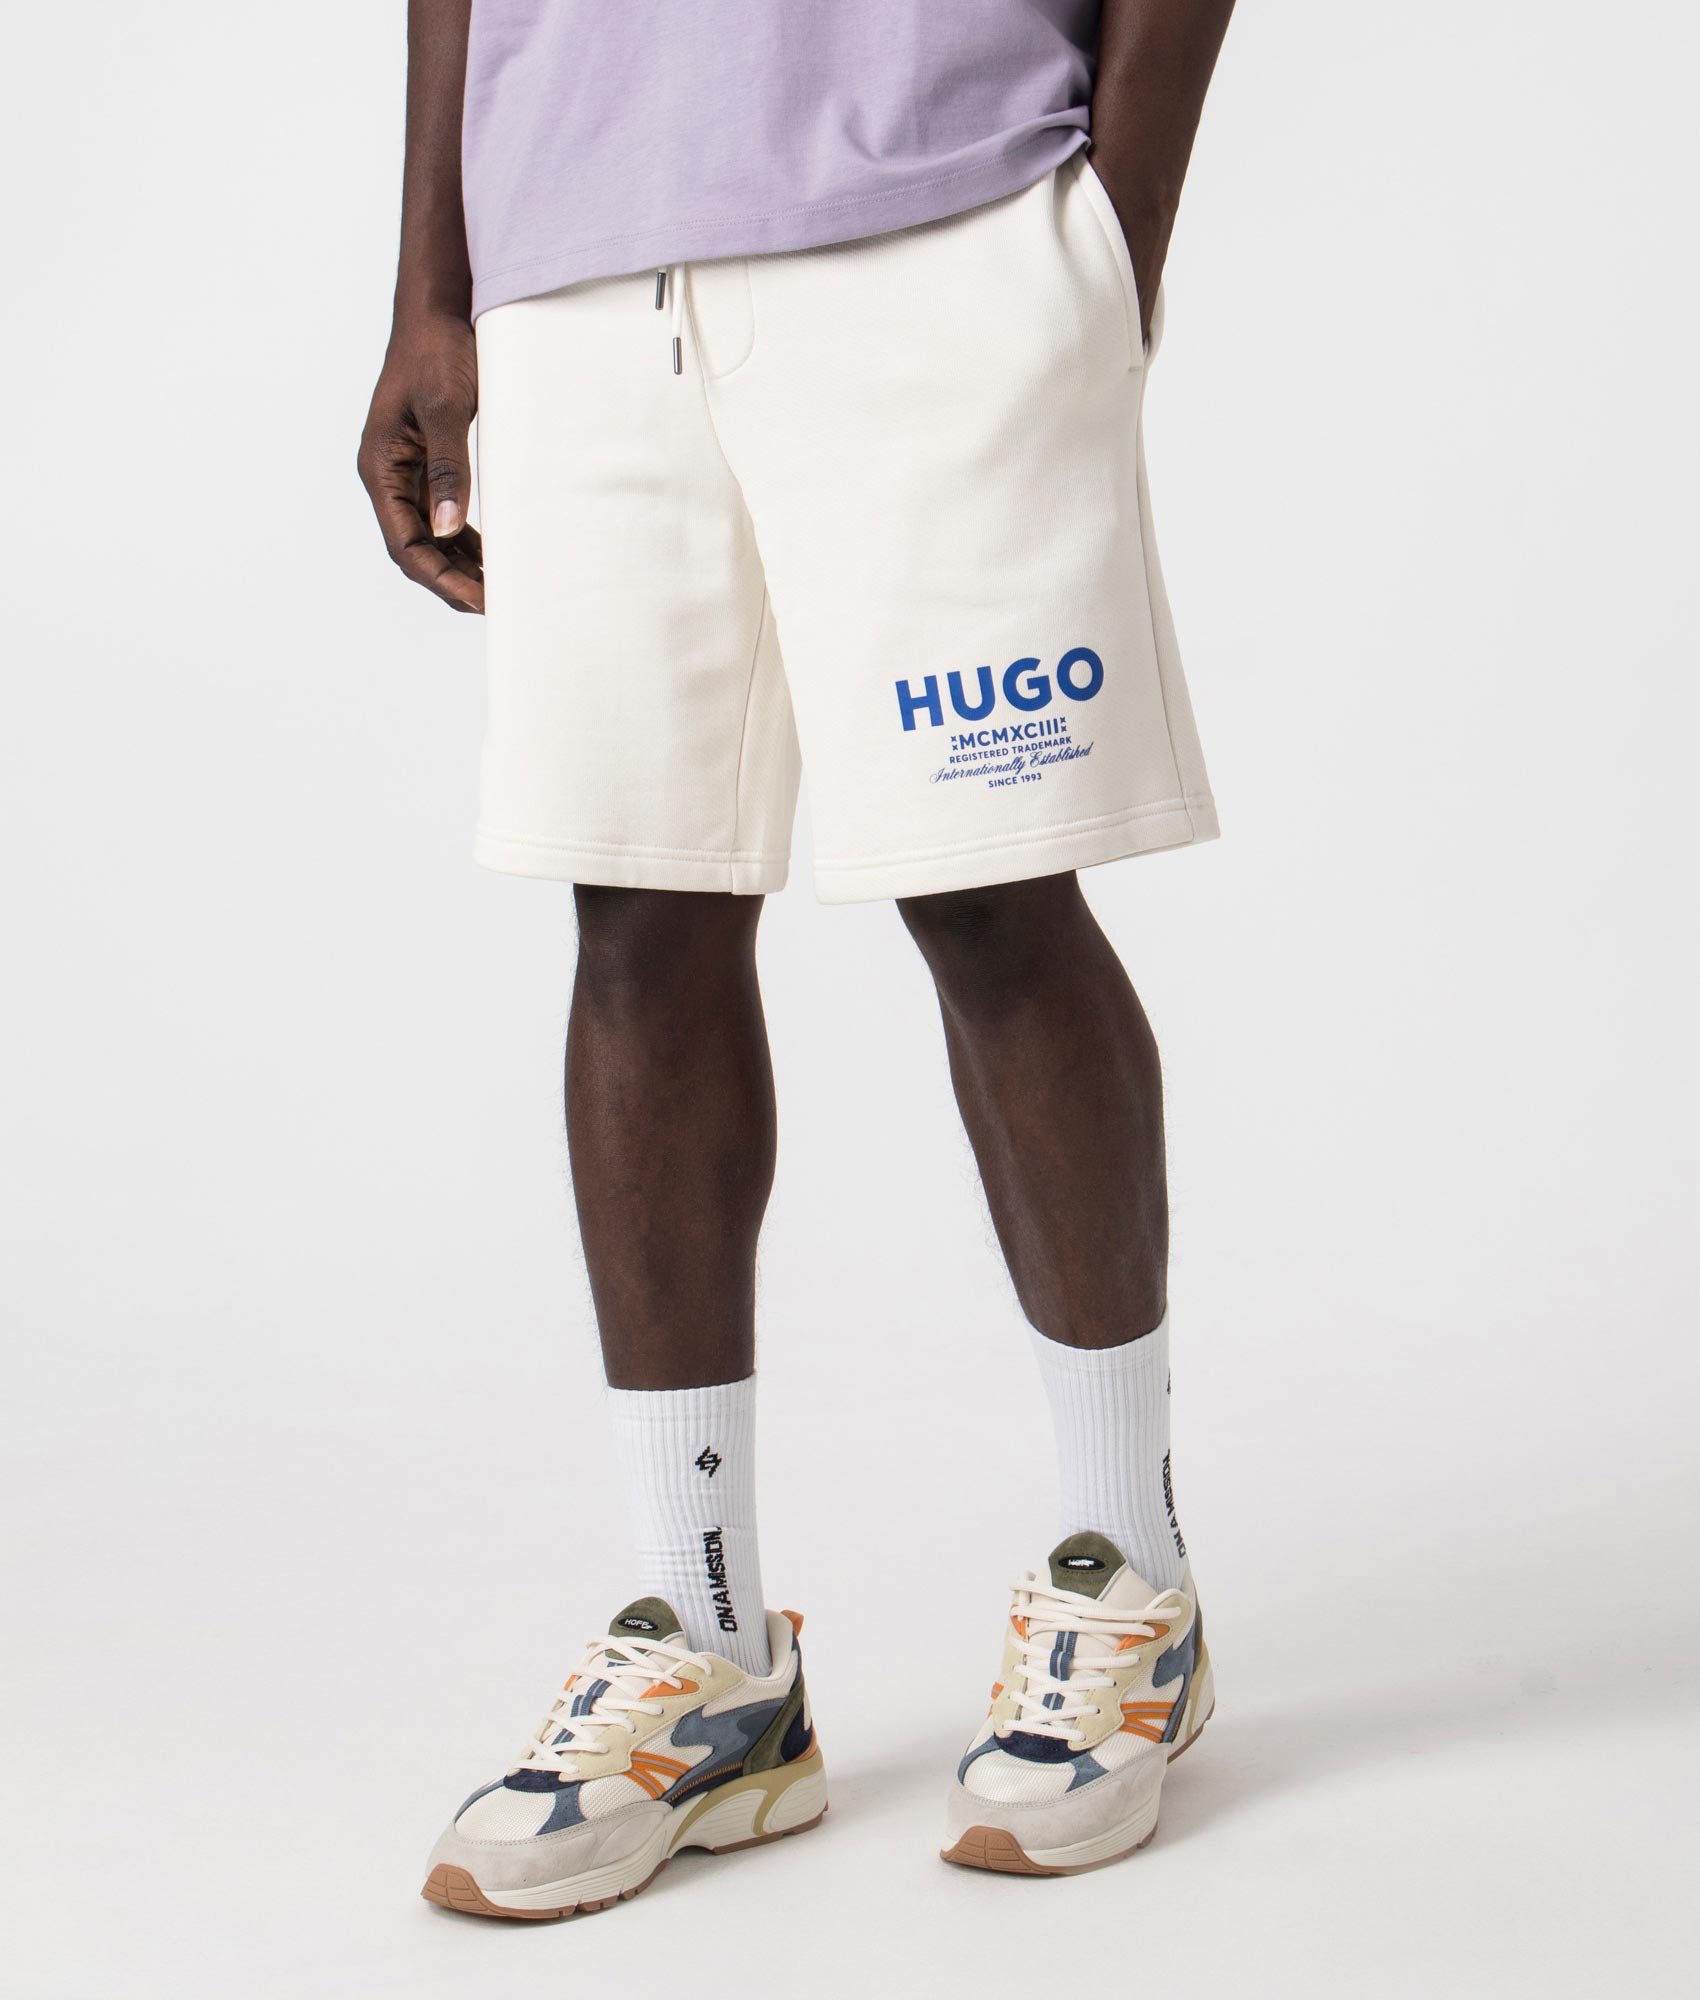 HUGO Mens Relaxed Fit Nomario Sweat Shorts - Colour: 121 Open White - Size: Small